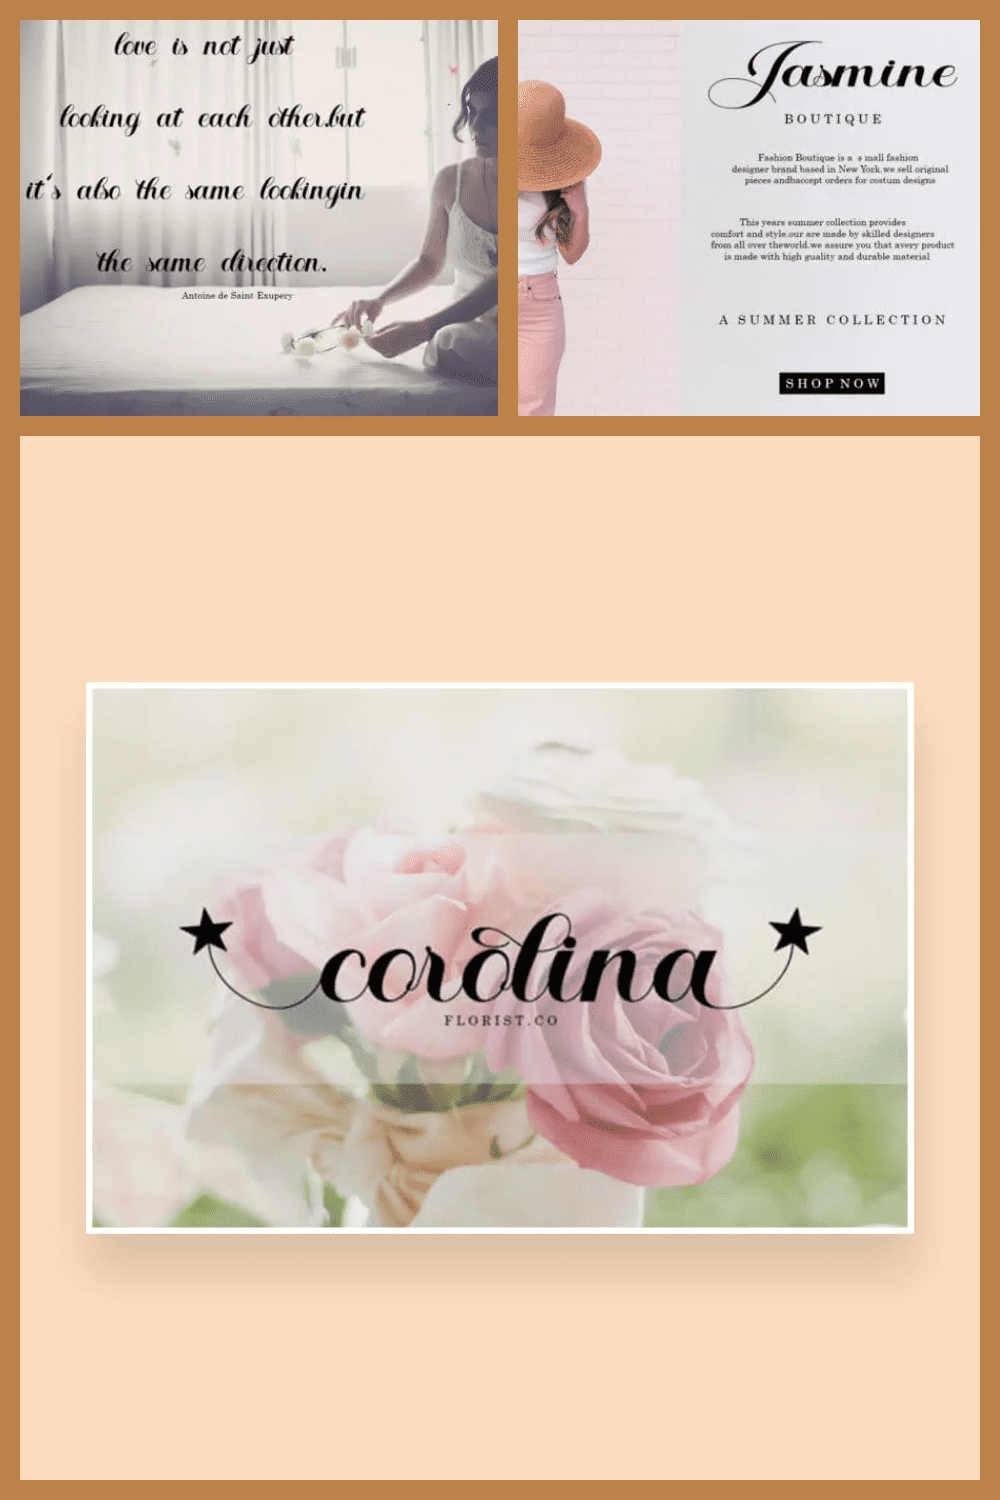 Beautiful, handwritten font against the background of a bouquet of flowers and a girl in the room.